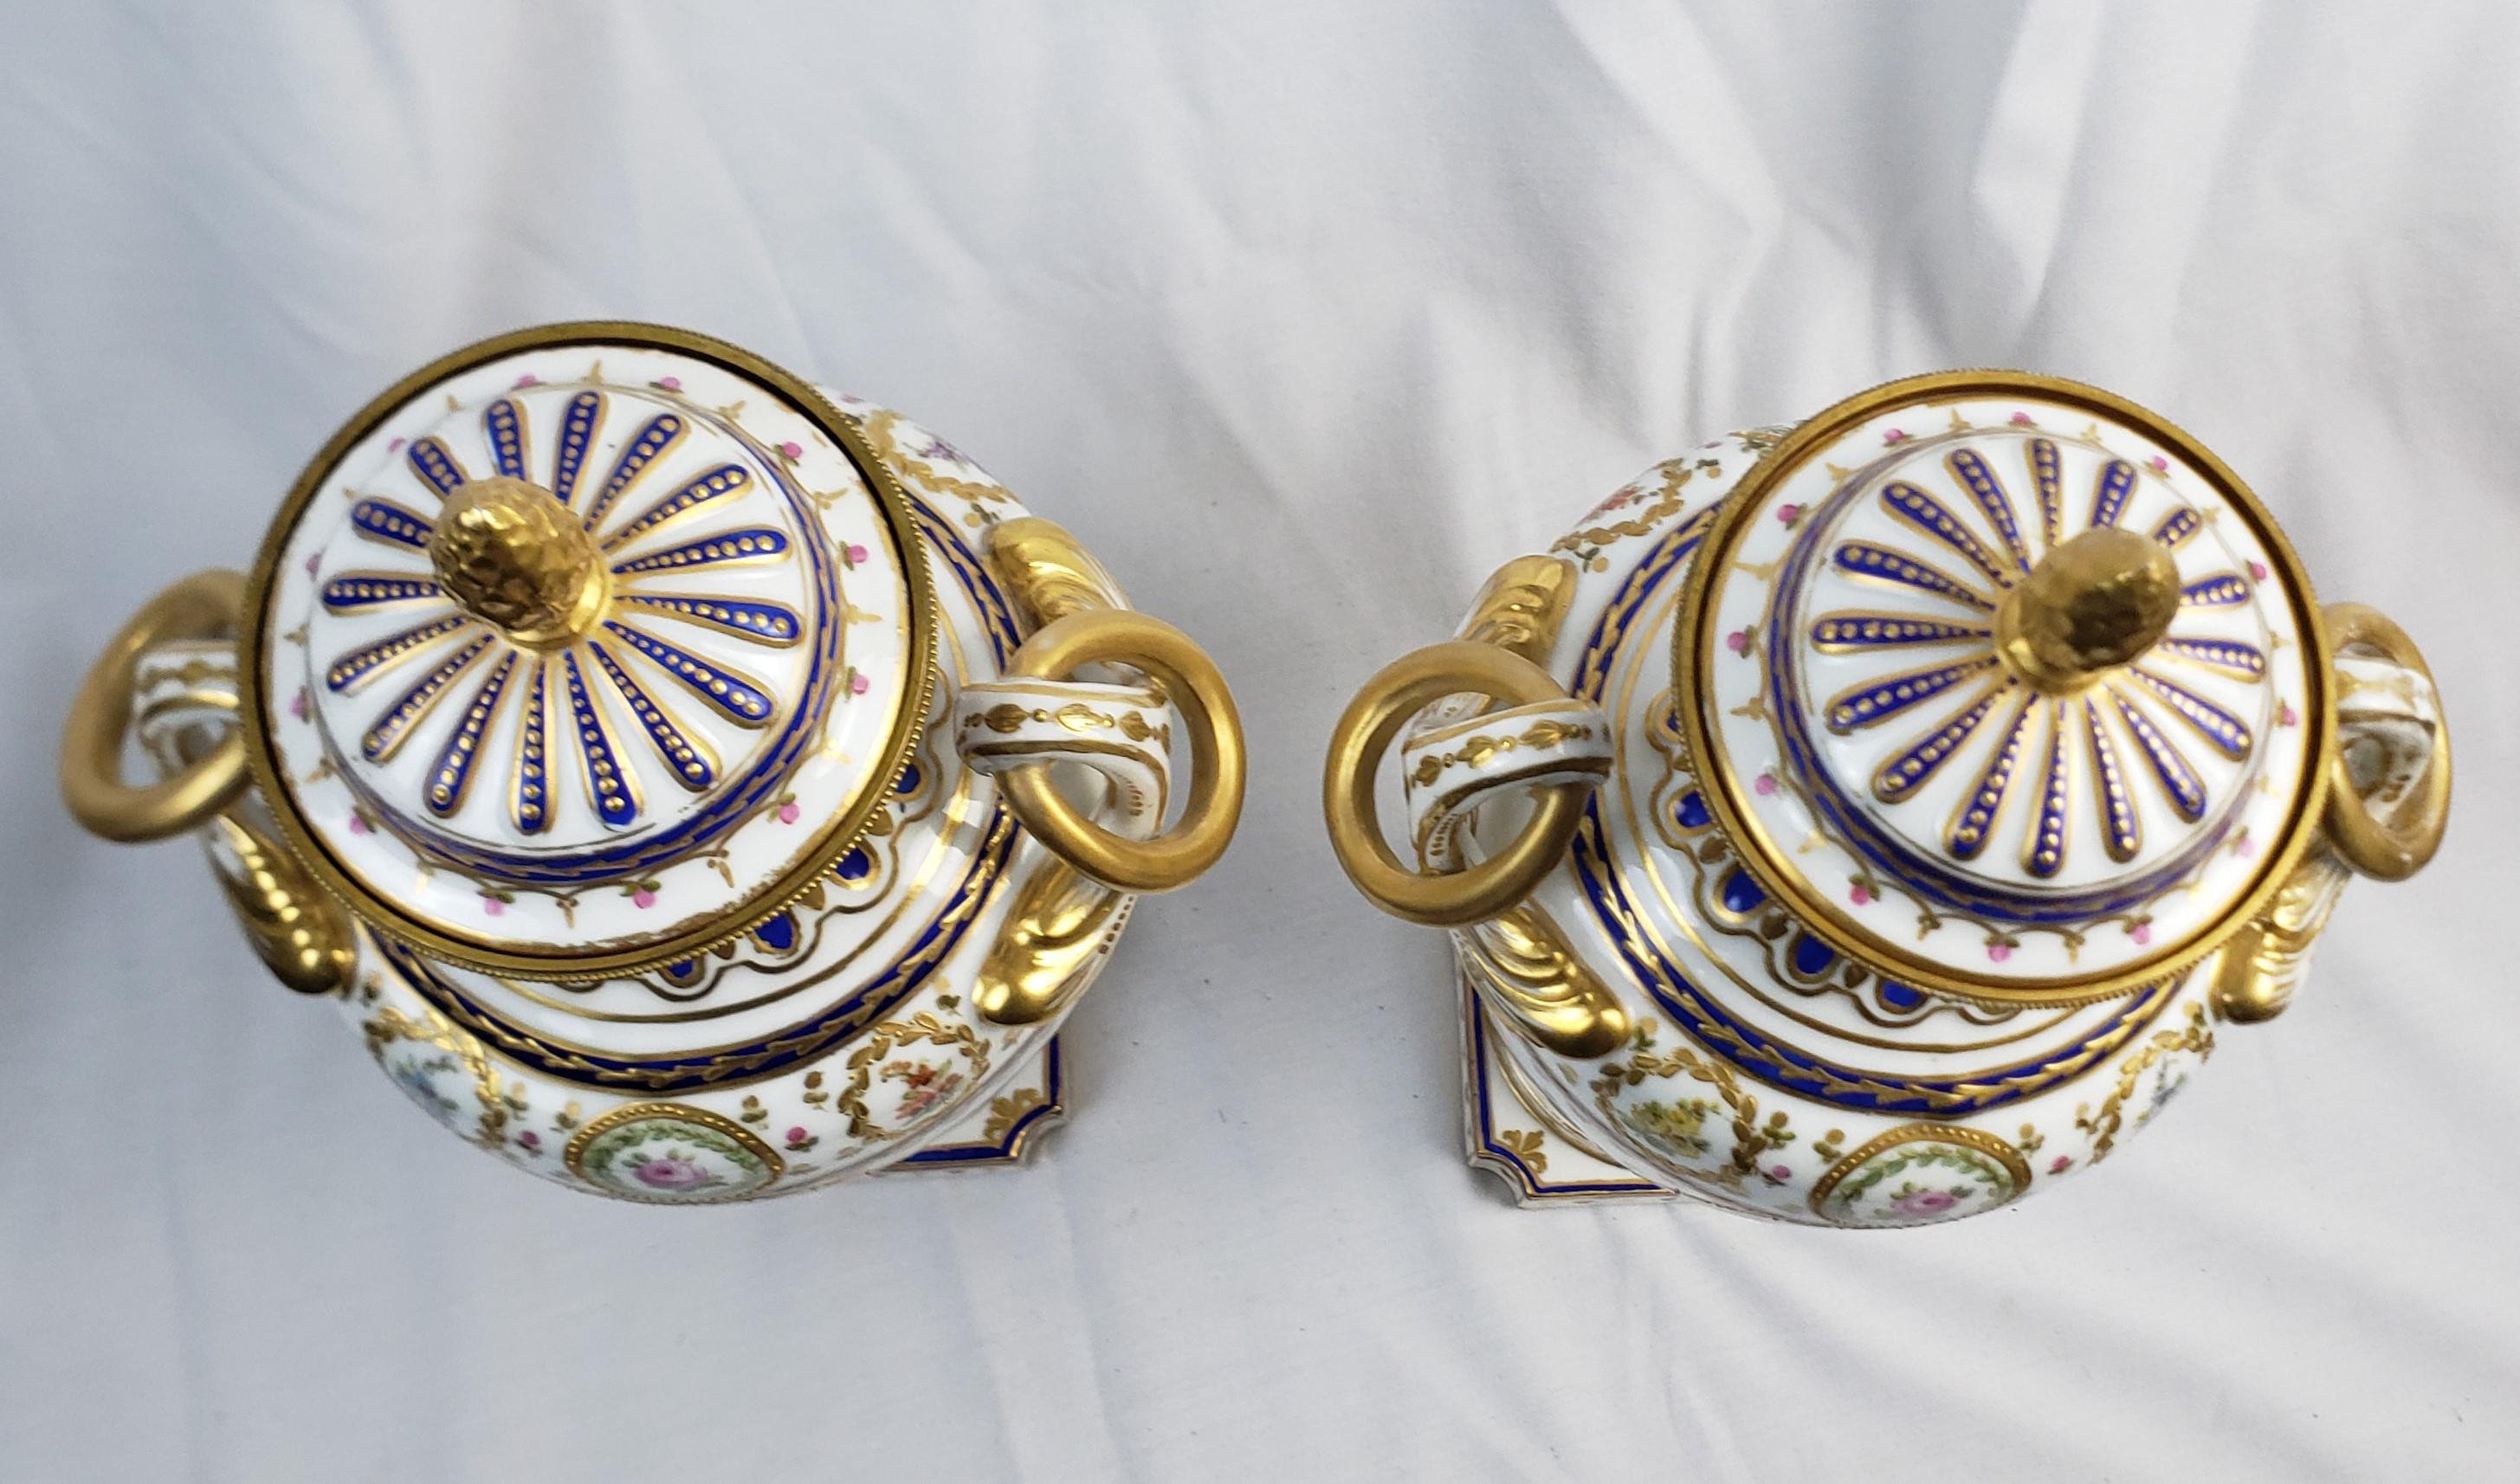 Pair of Antique Sevres Styled Covered Urns with Ornate Hand-Painted Decoration For Sale 1